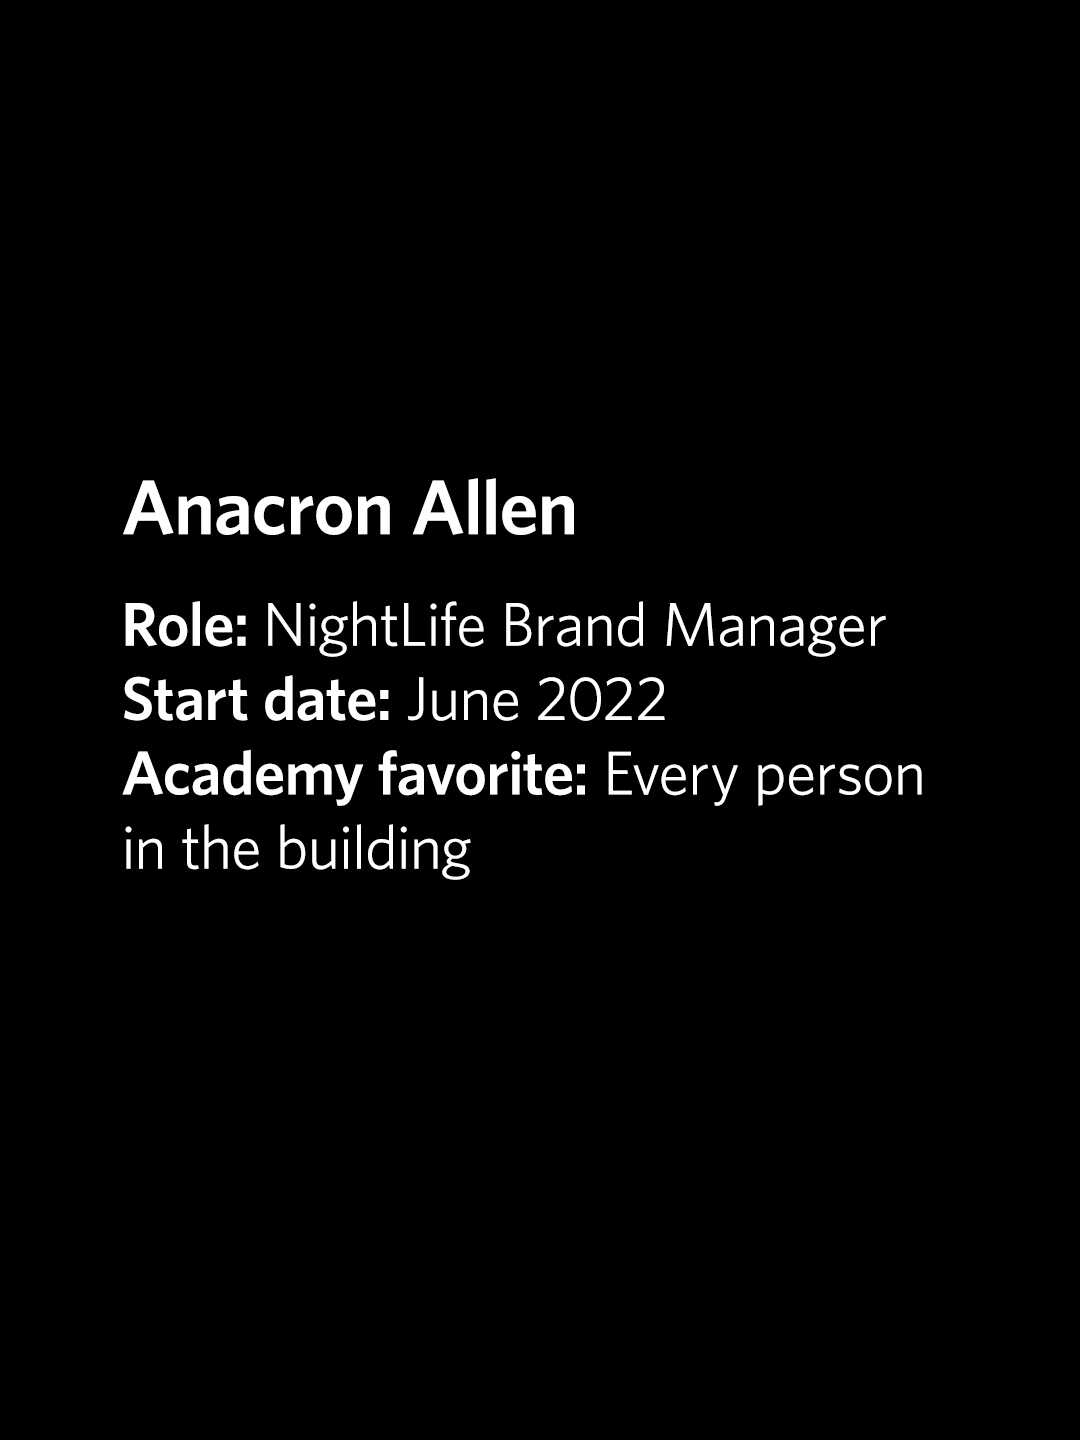 Anacron Allen, NightLife Brand Manager, started June 2022, favorite thing at Academy is every person in the building